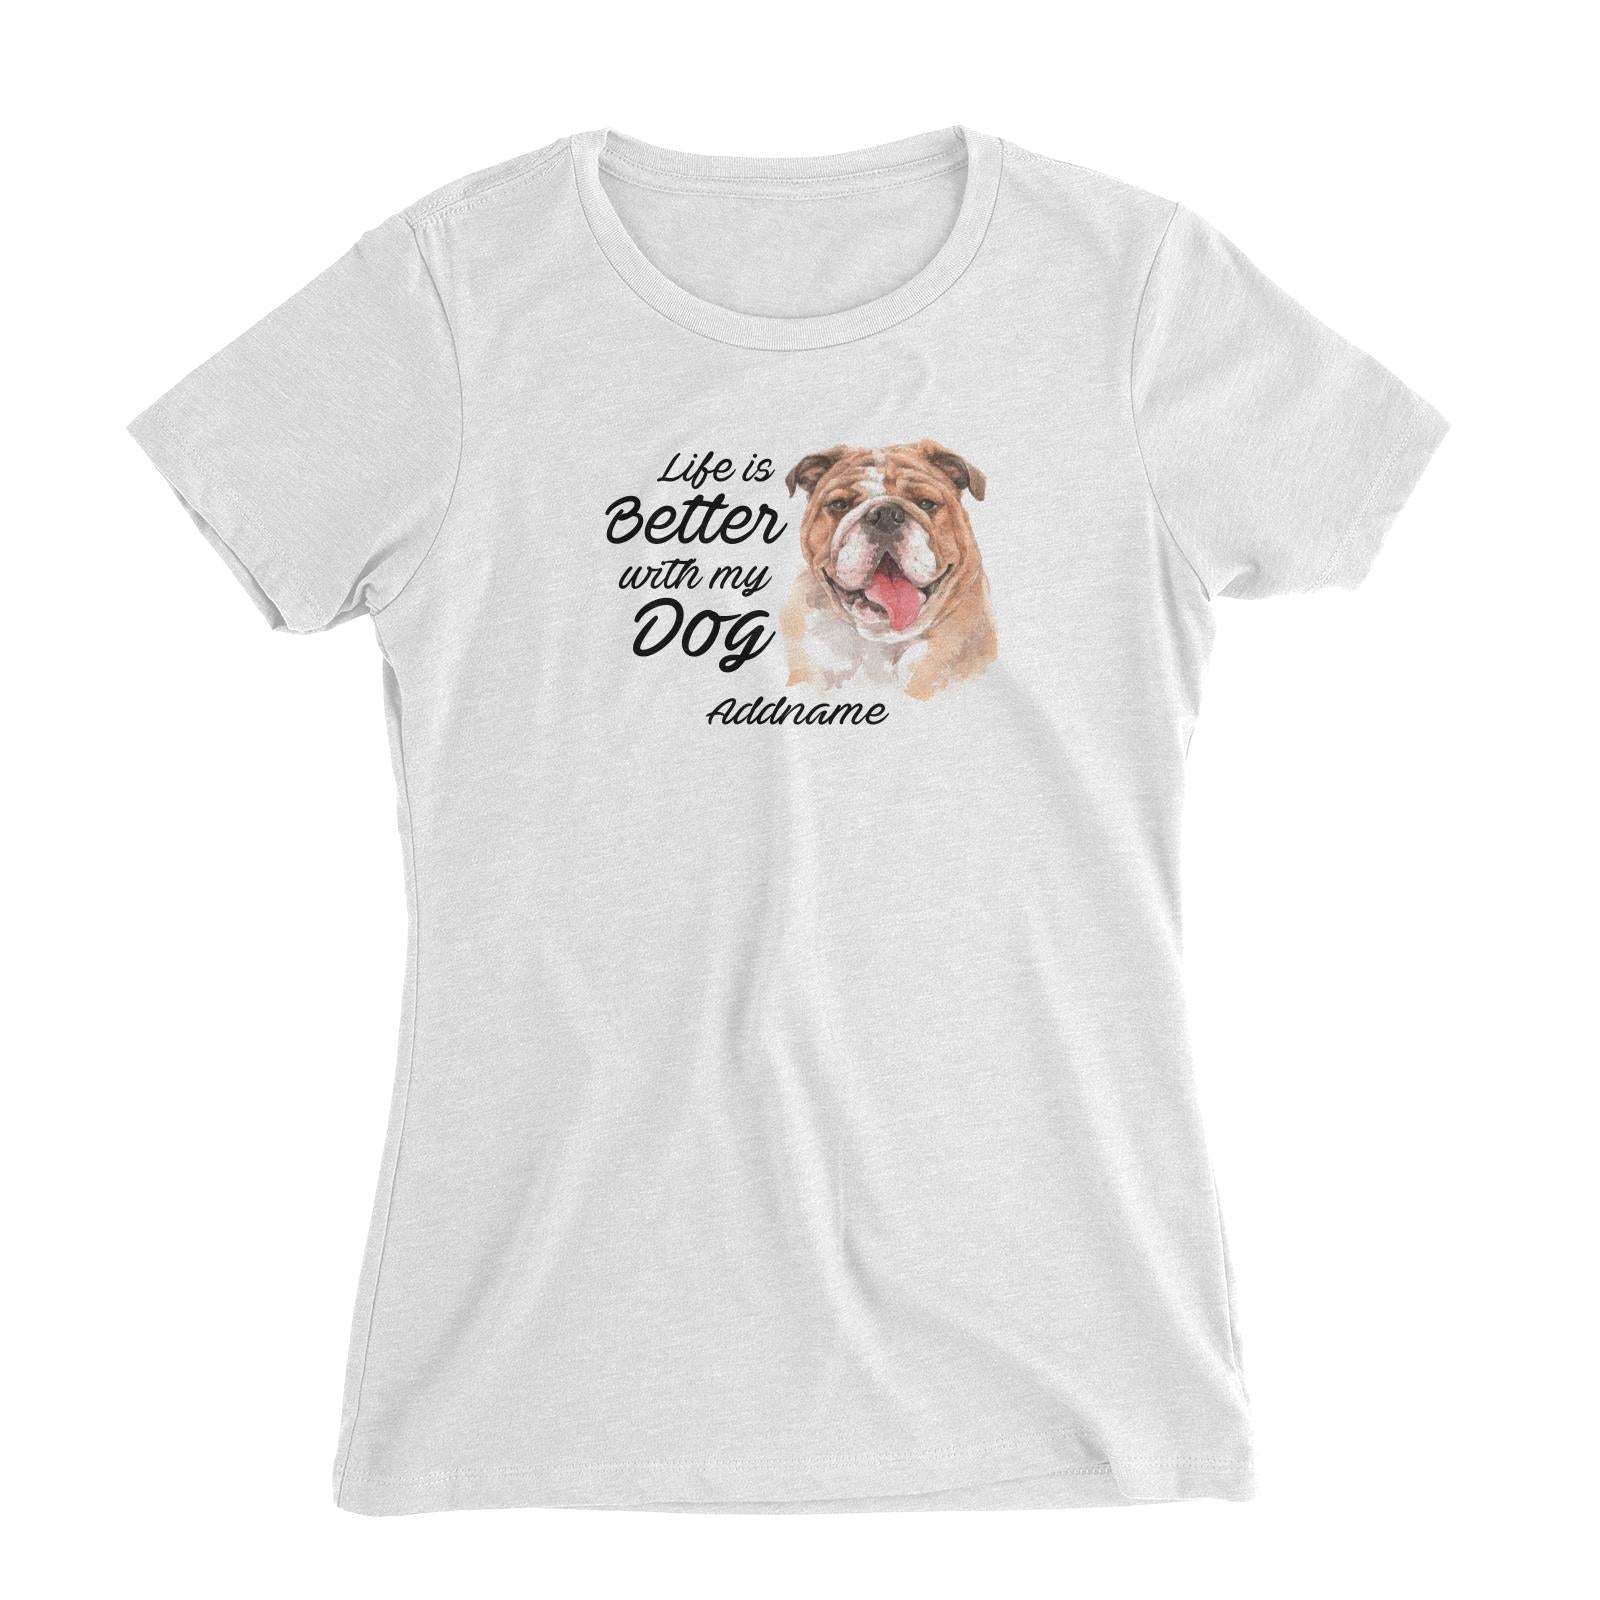 Watercolor Life is Better With My Dog Bulldog Addname Women's Slim Fit T-Shirt